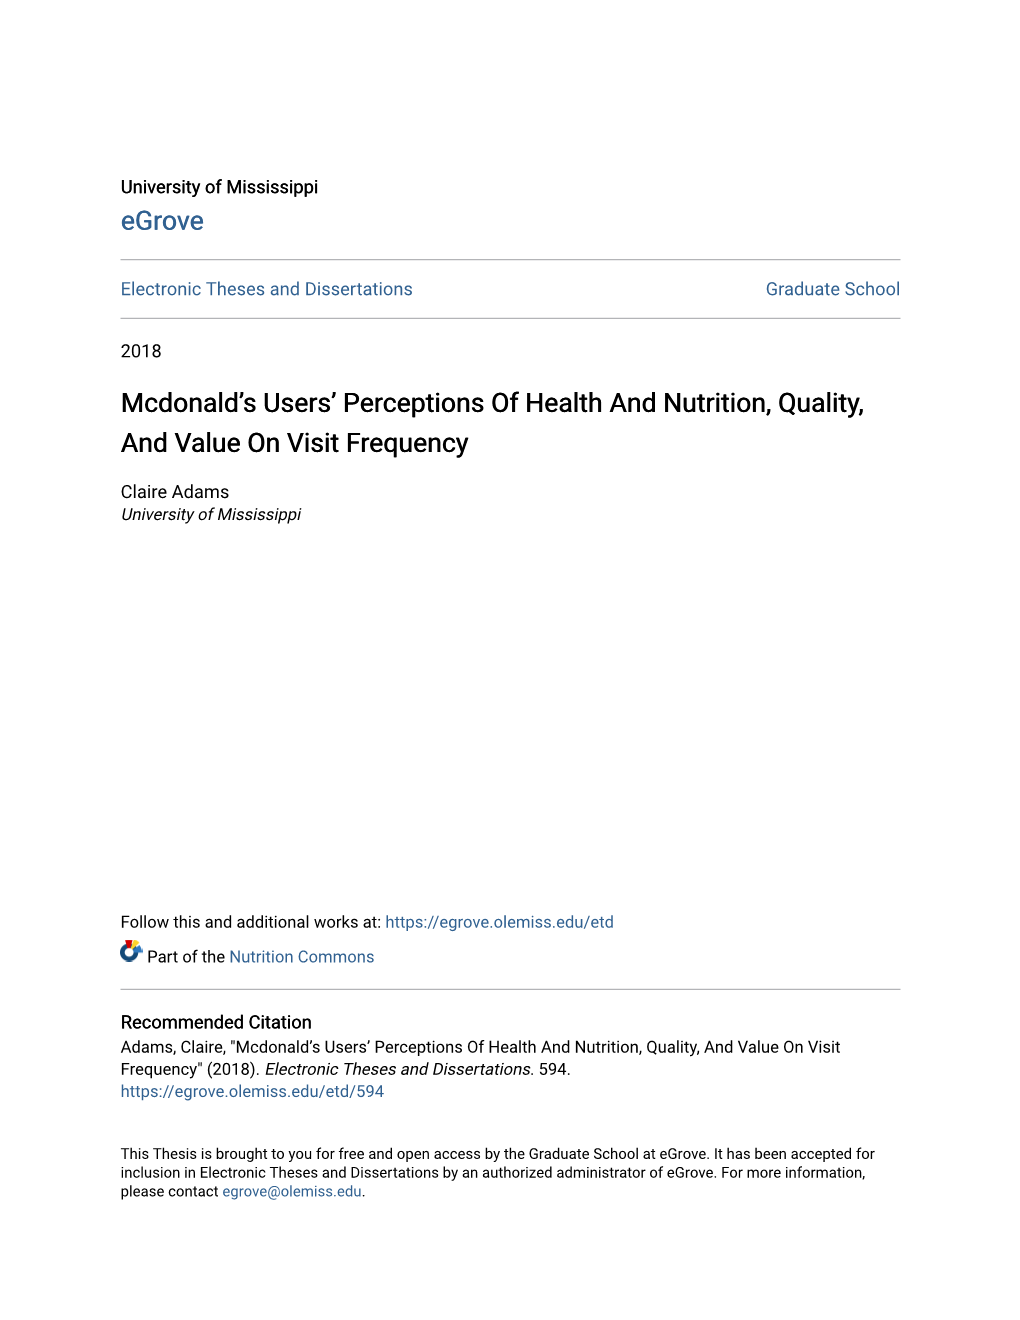 Mcdonald's Users' Perceptions of Health and Nutrition, Quality, And